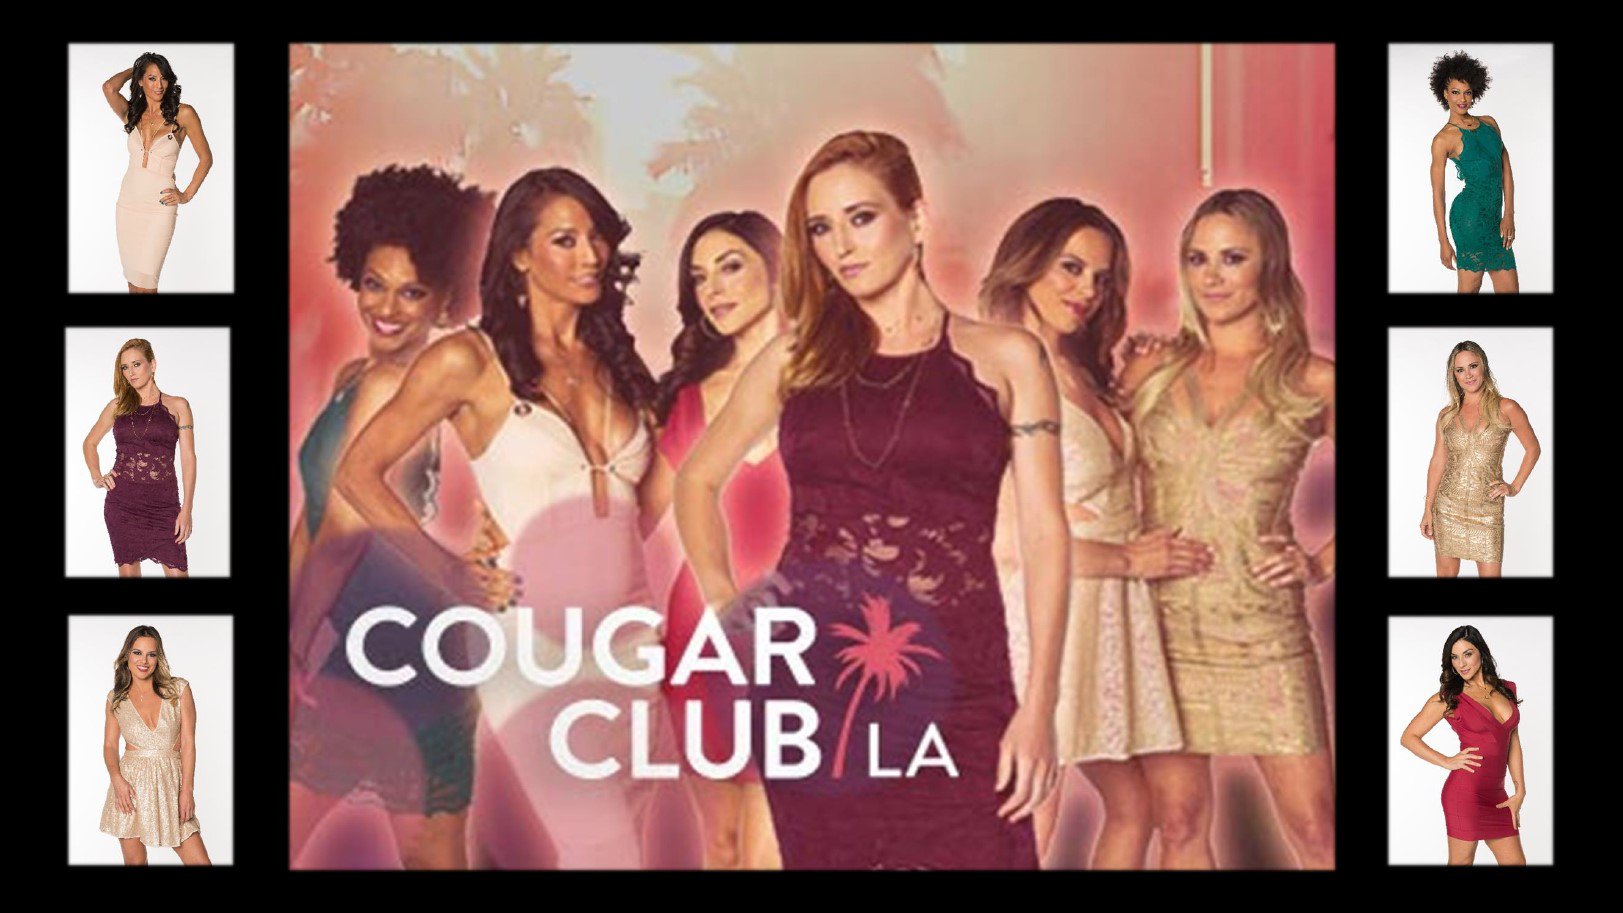 “The Cougars on COUGAR CLUB LA know #humpday” .